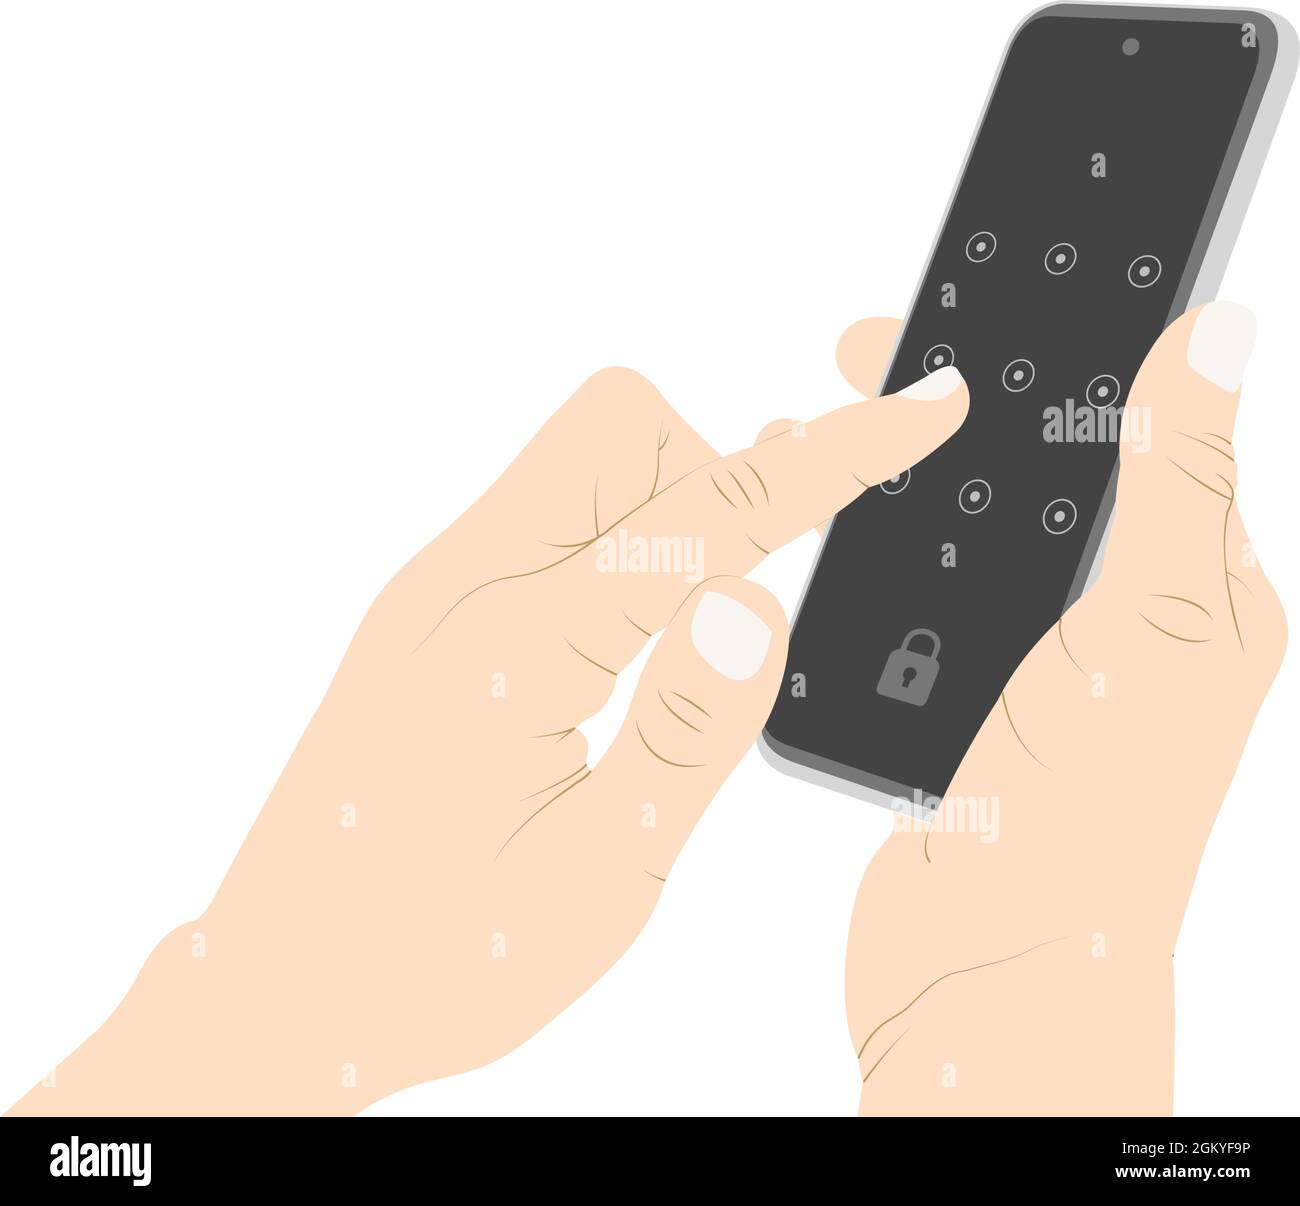 Smartphone security pattern operation, unlocking, locking, entering pin code, phone guard, phone security vector stock illustration Stock Vector